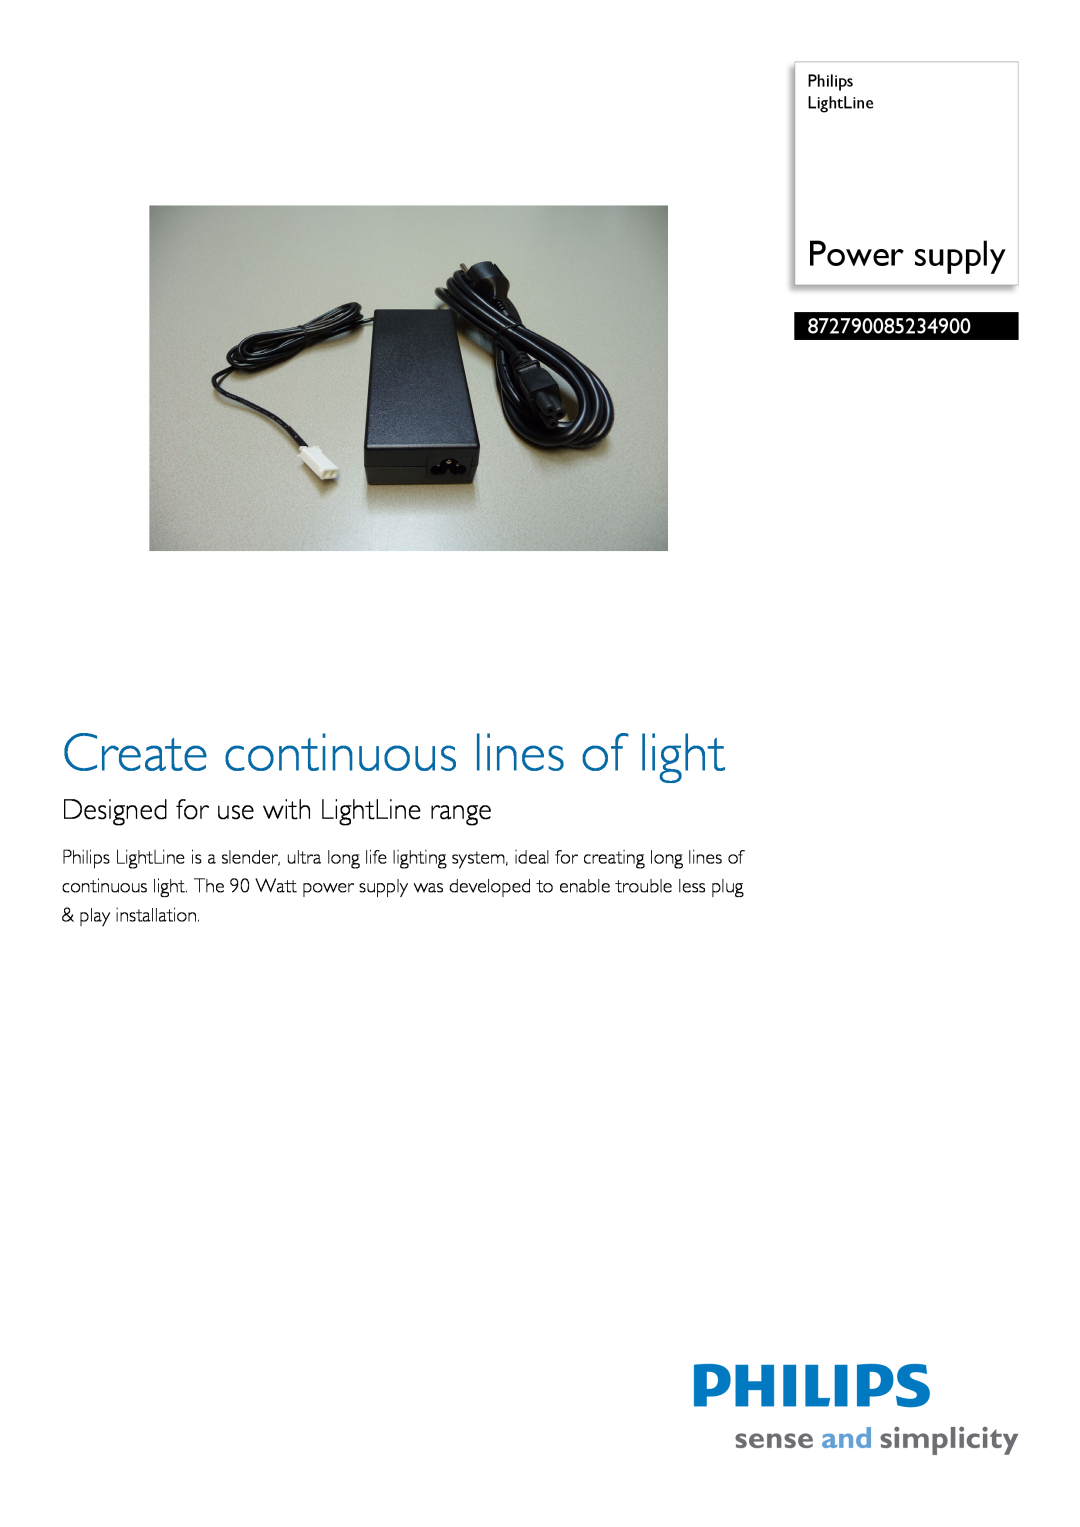 Philips 872790085234900 manual Philips LightLine, Create continuous lines of light, Power supply 